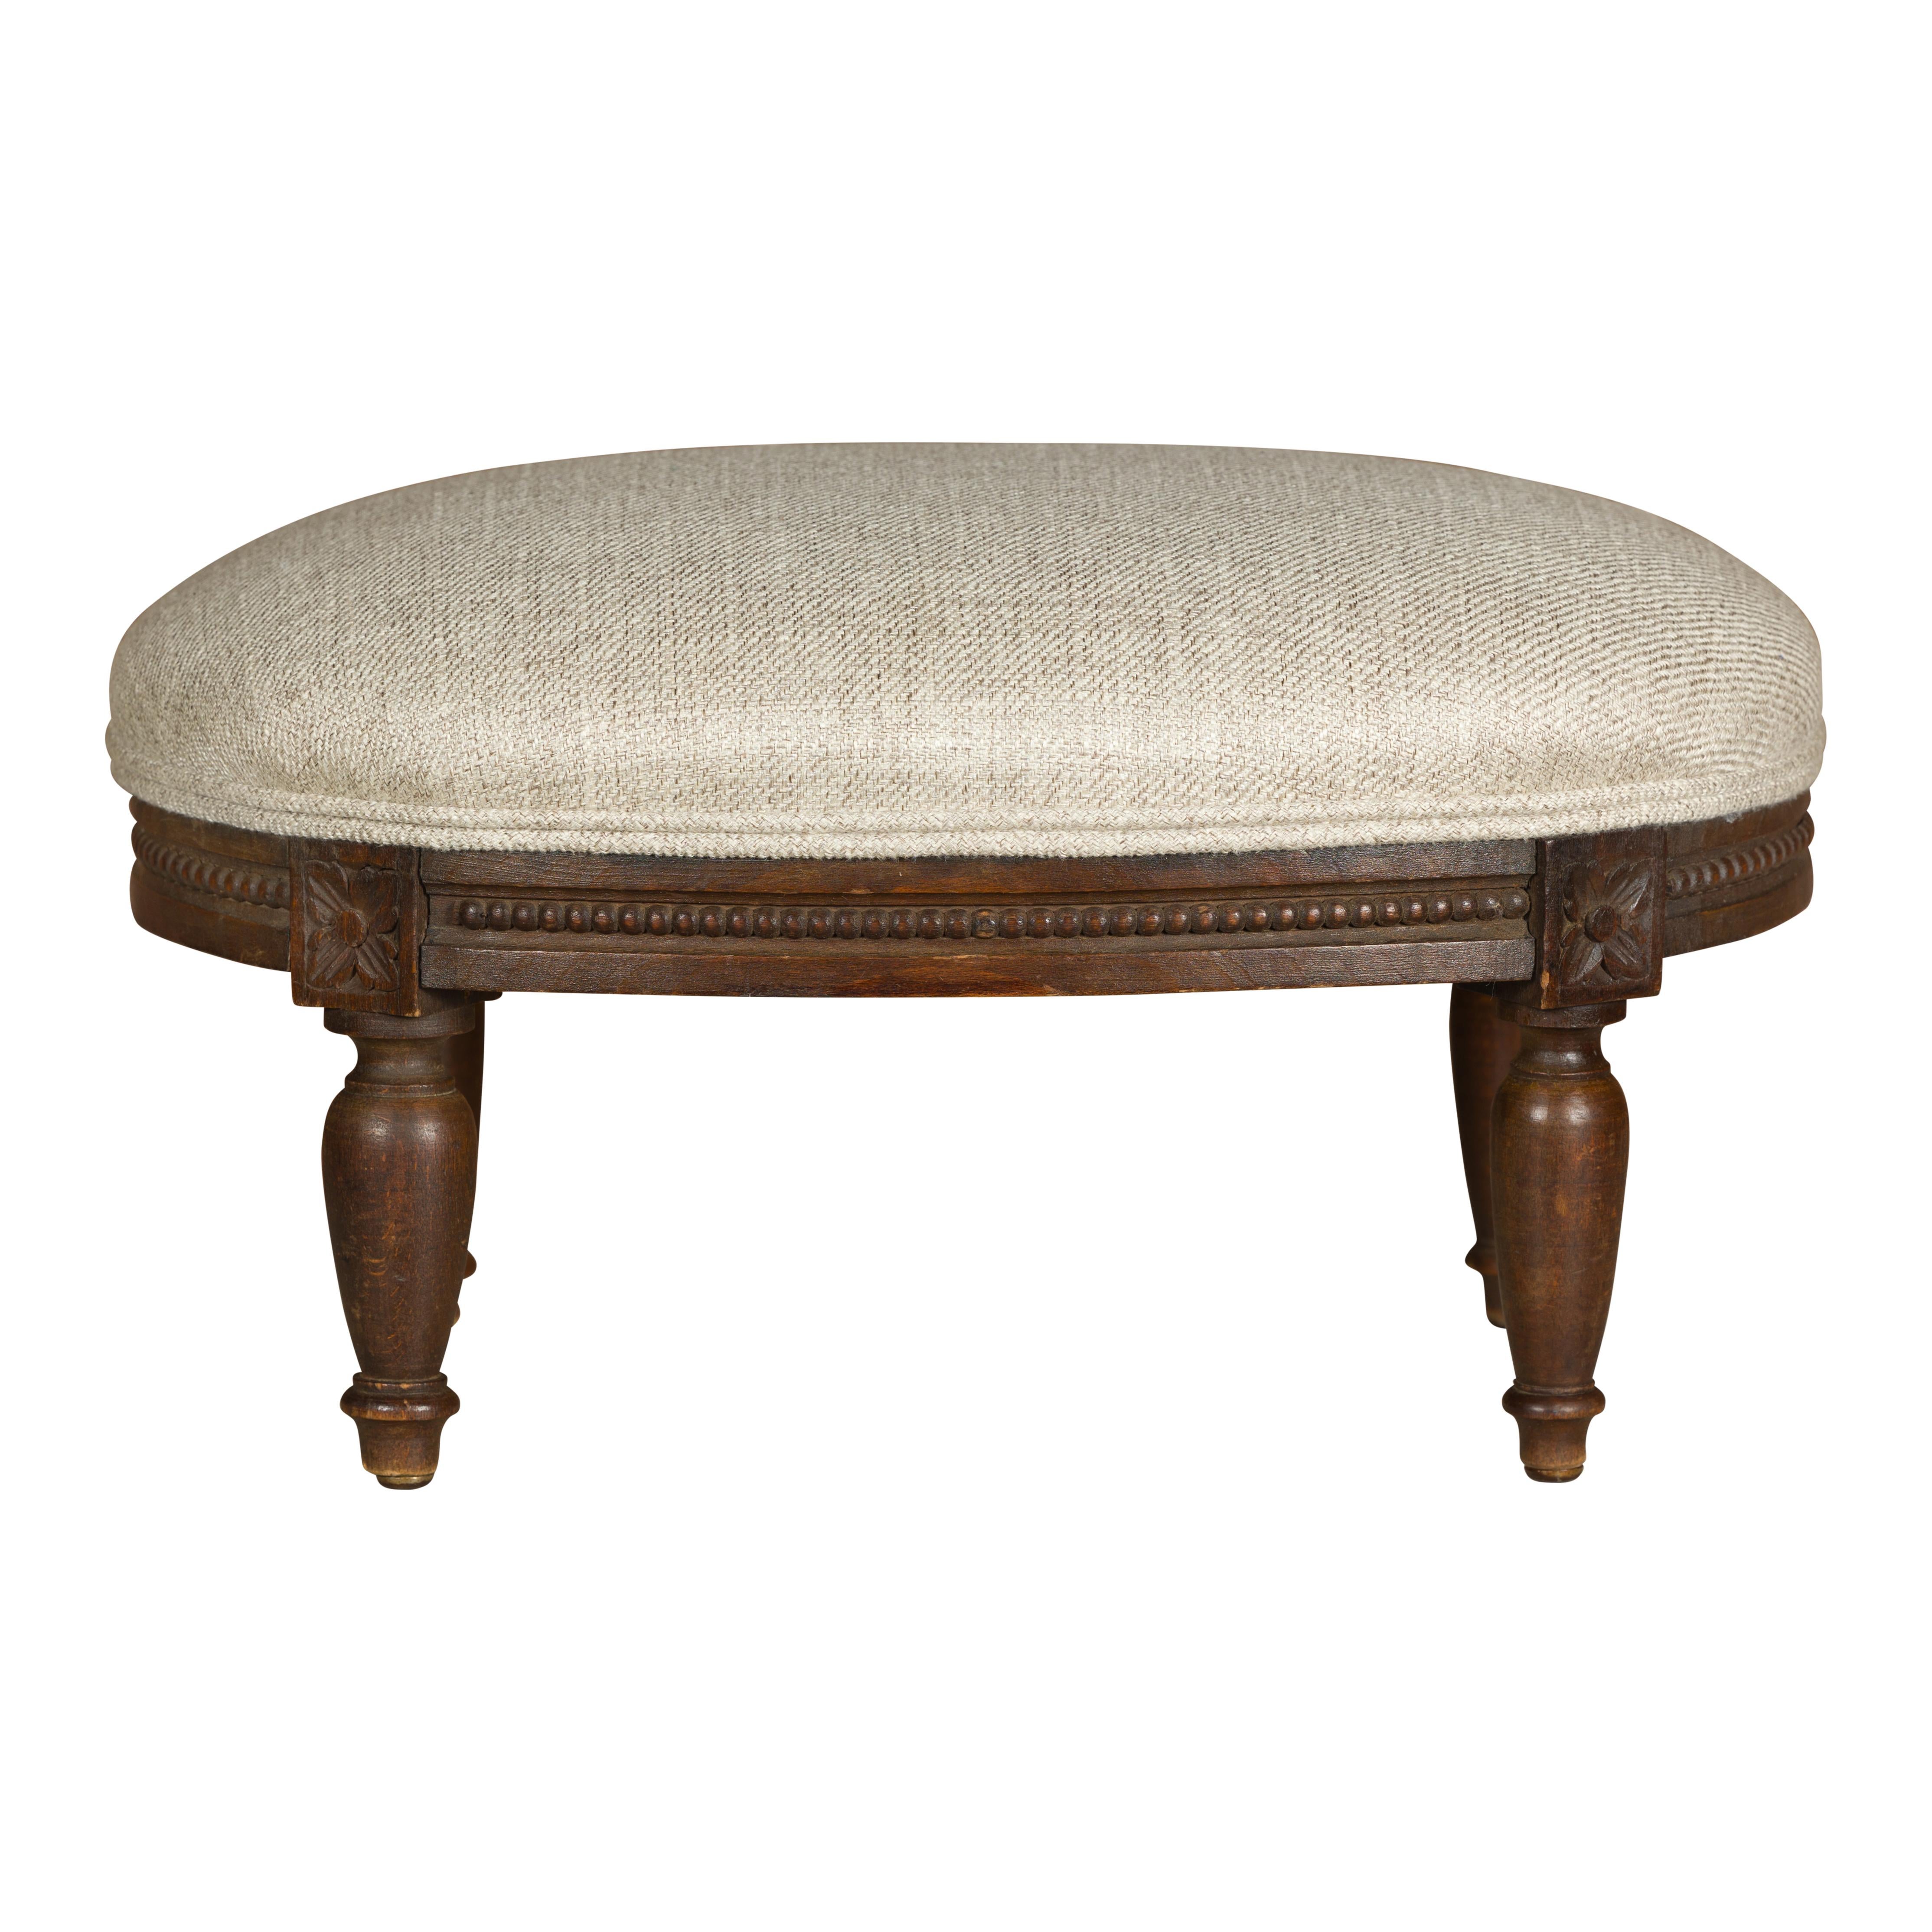 French Louis XVI Style 1900s Footstool with Carved Rosettes and Beads For Sale 7